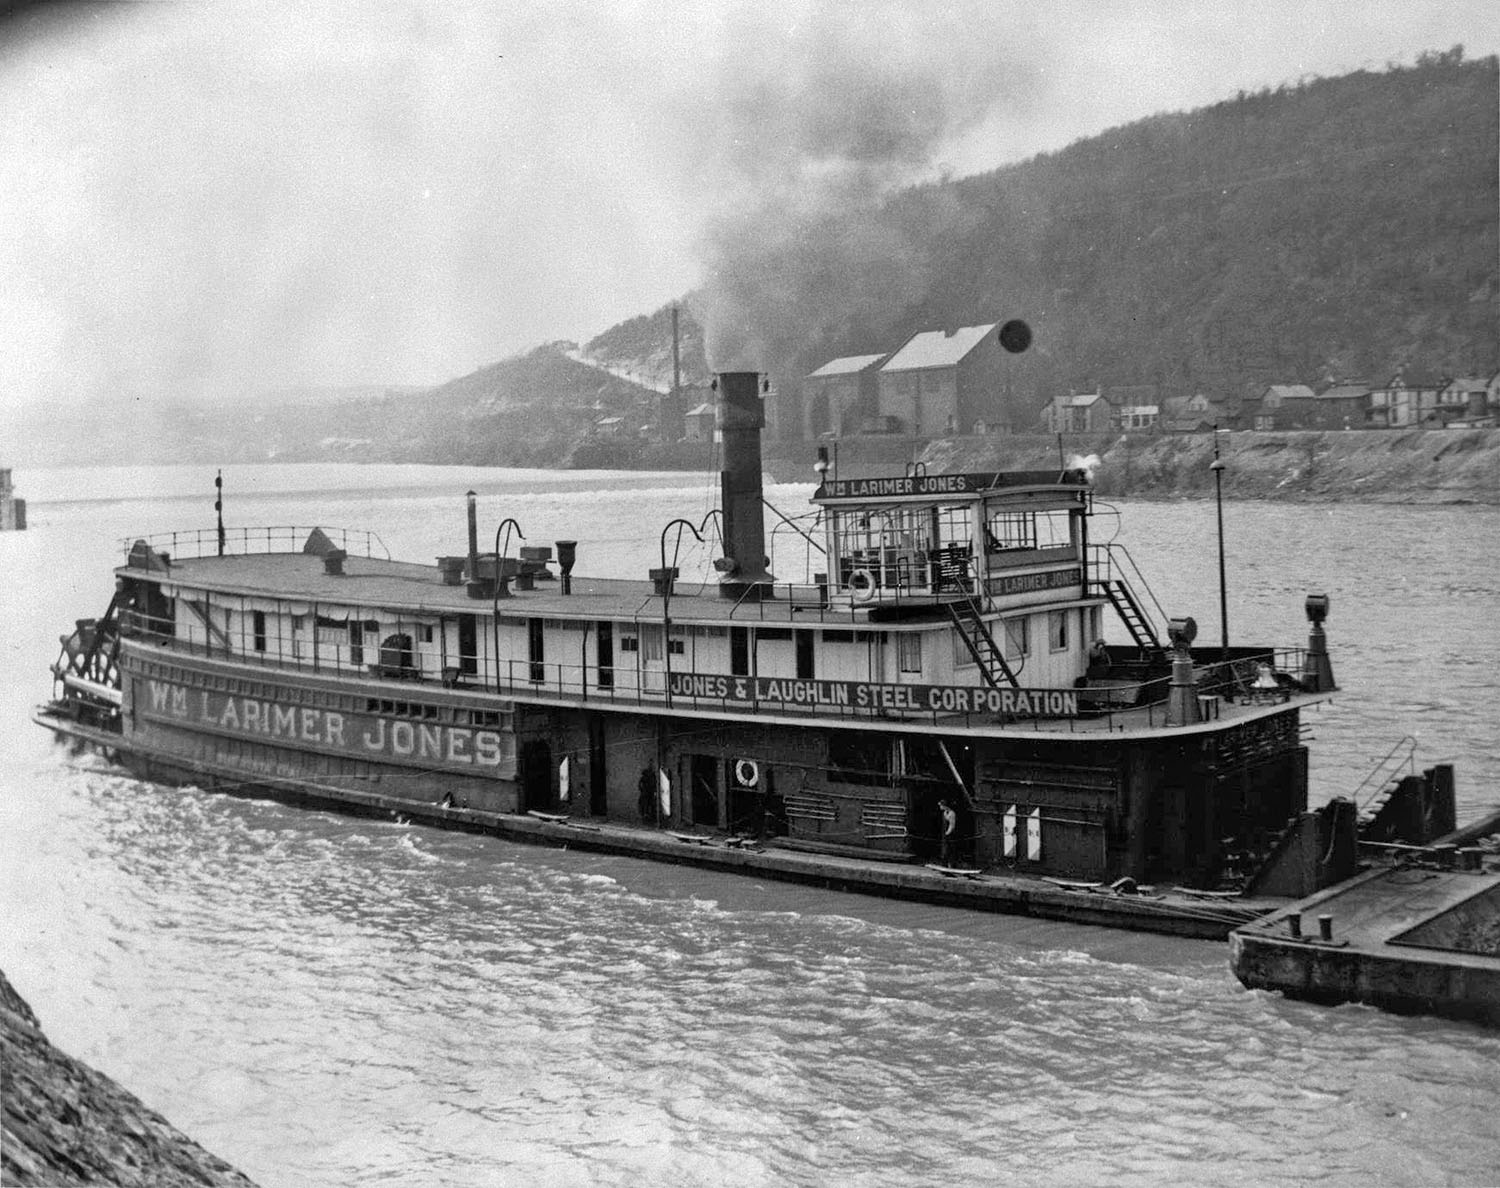 The Wm. Larimer Jones at work. Note no pilot wheel visible in pilothouse. (David Smith collection)